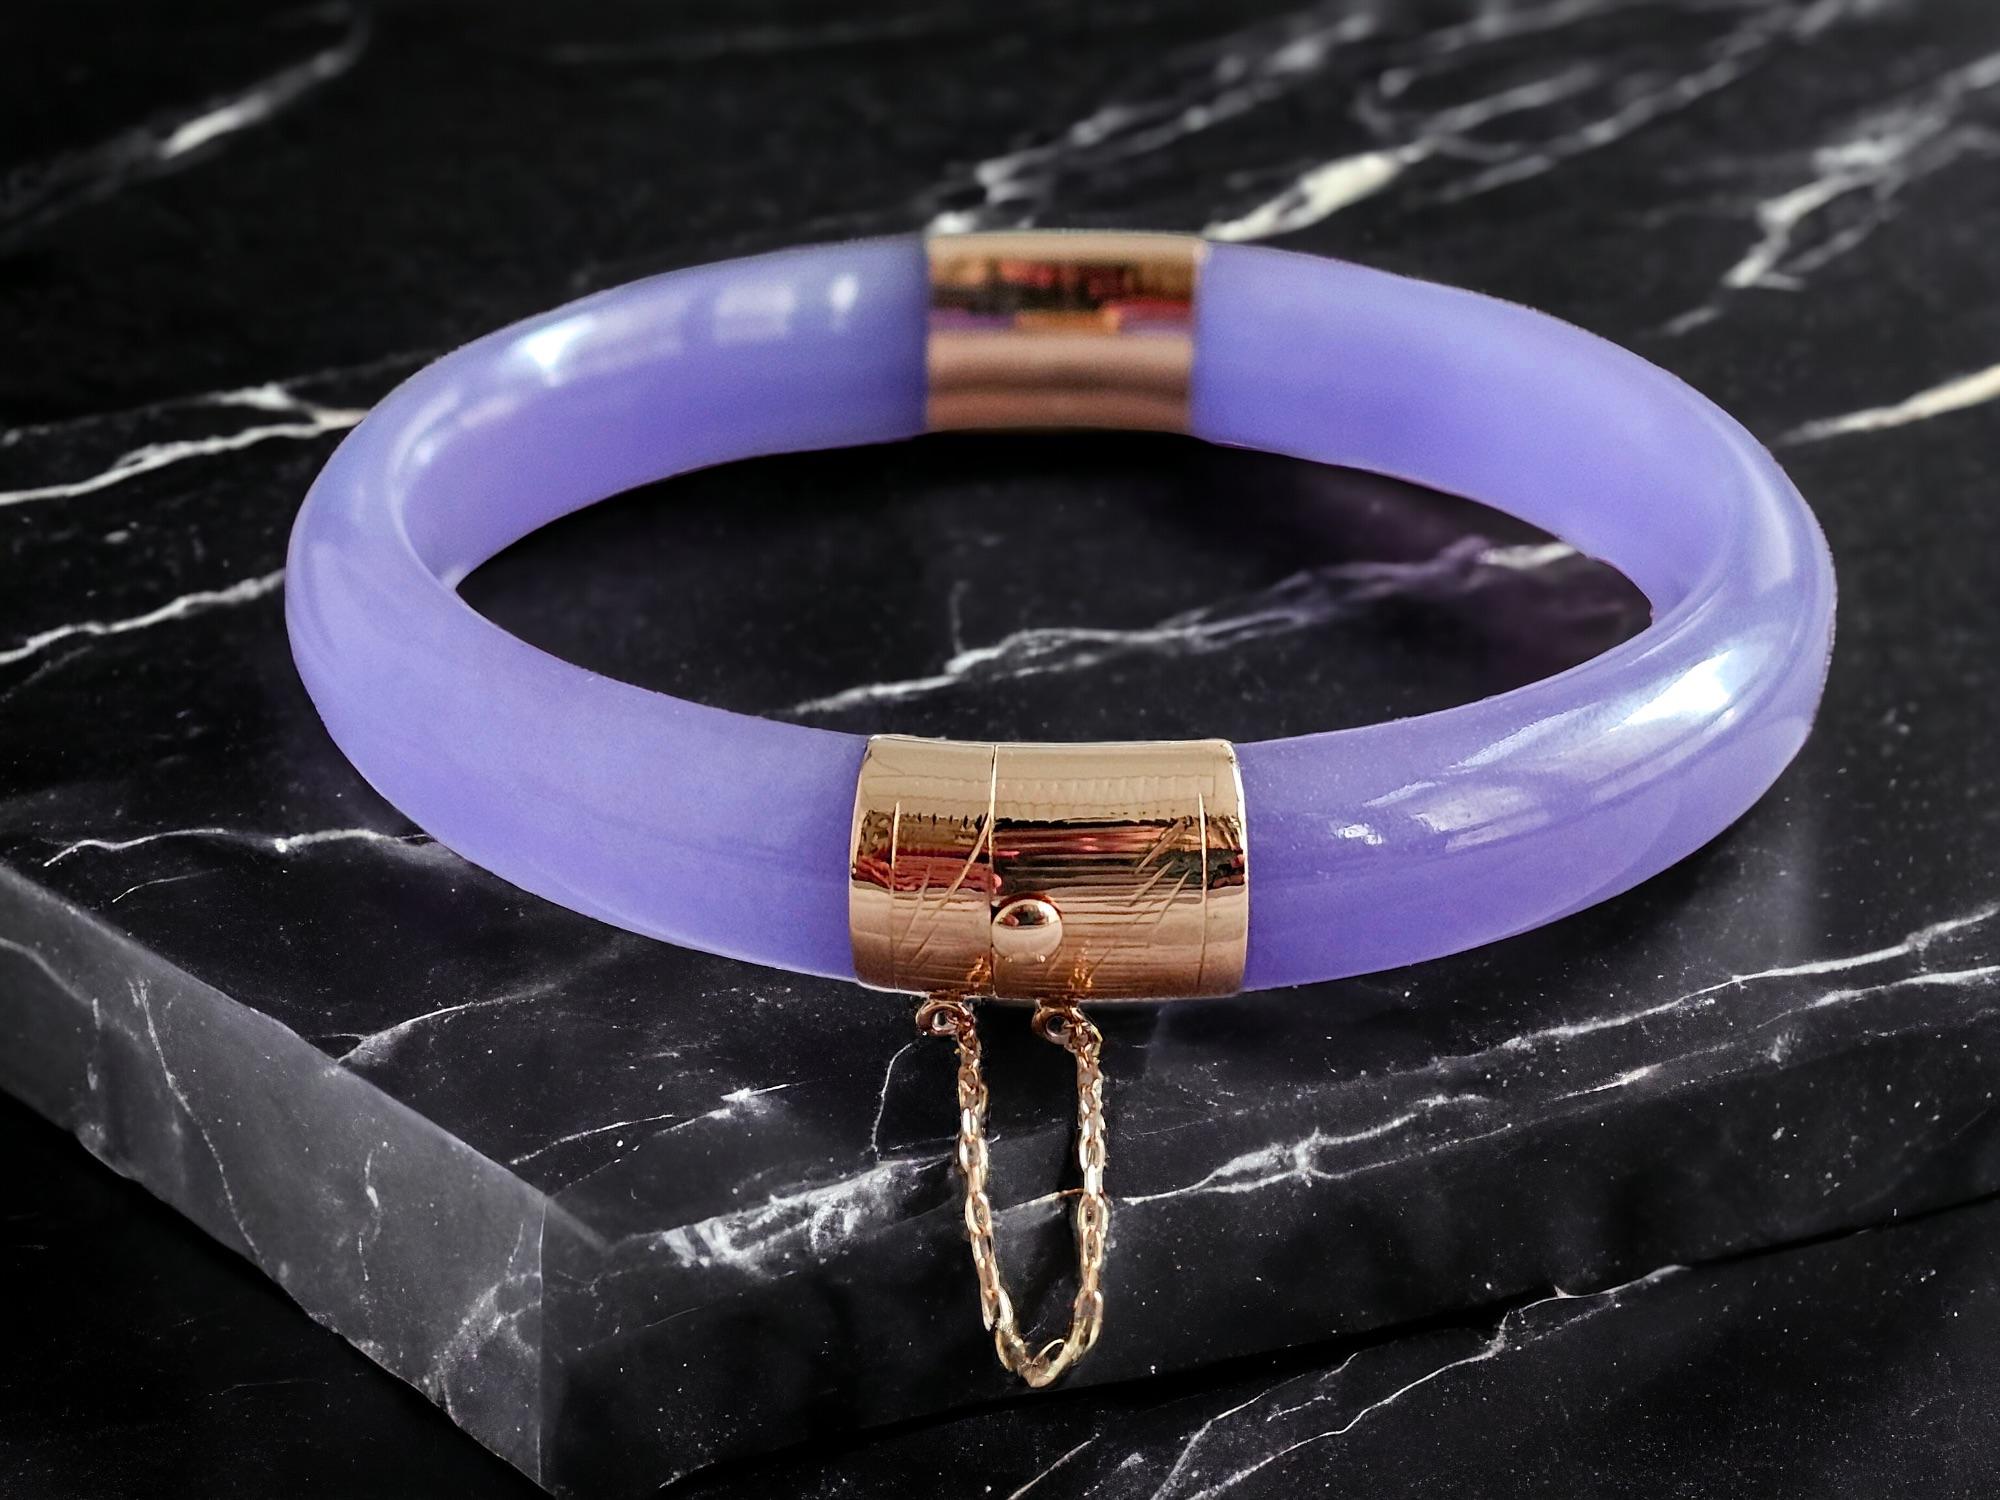 Viceroy's Circular Lavender Jade Bangle Bracelet (with 14K Yellow Gold) For Sale 1